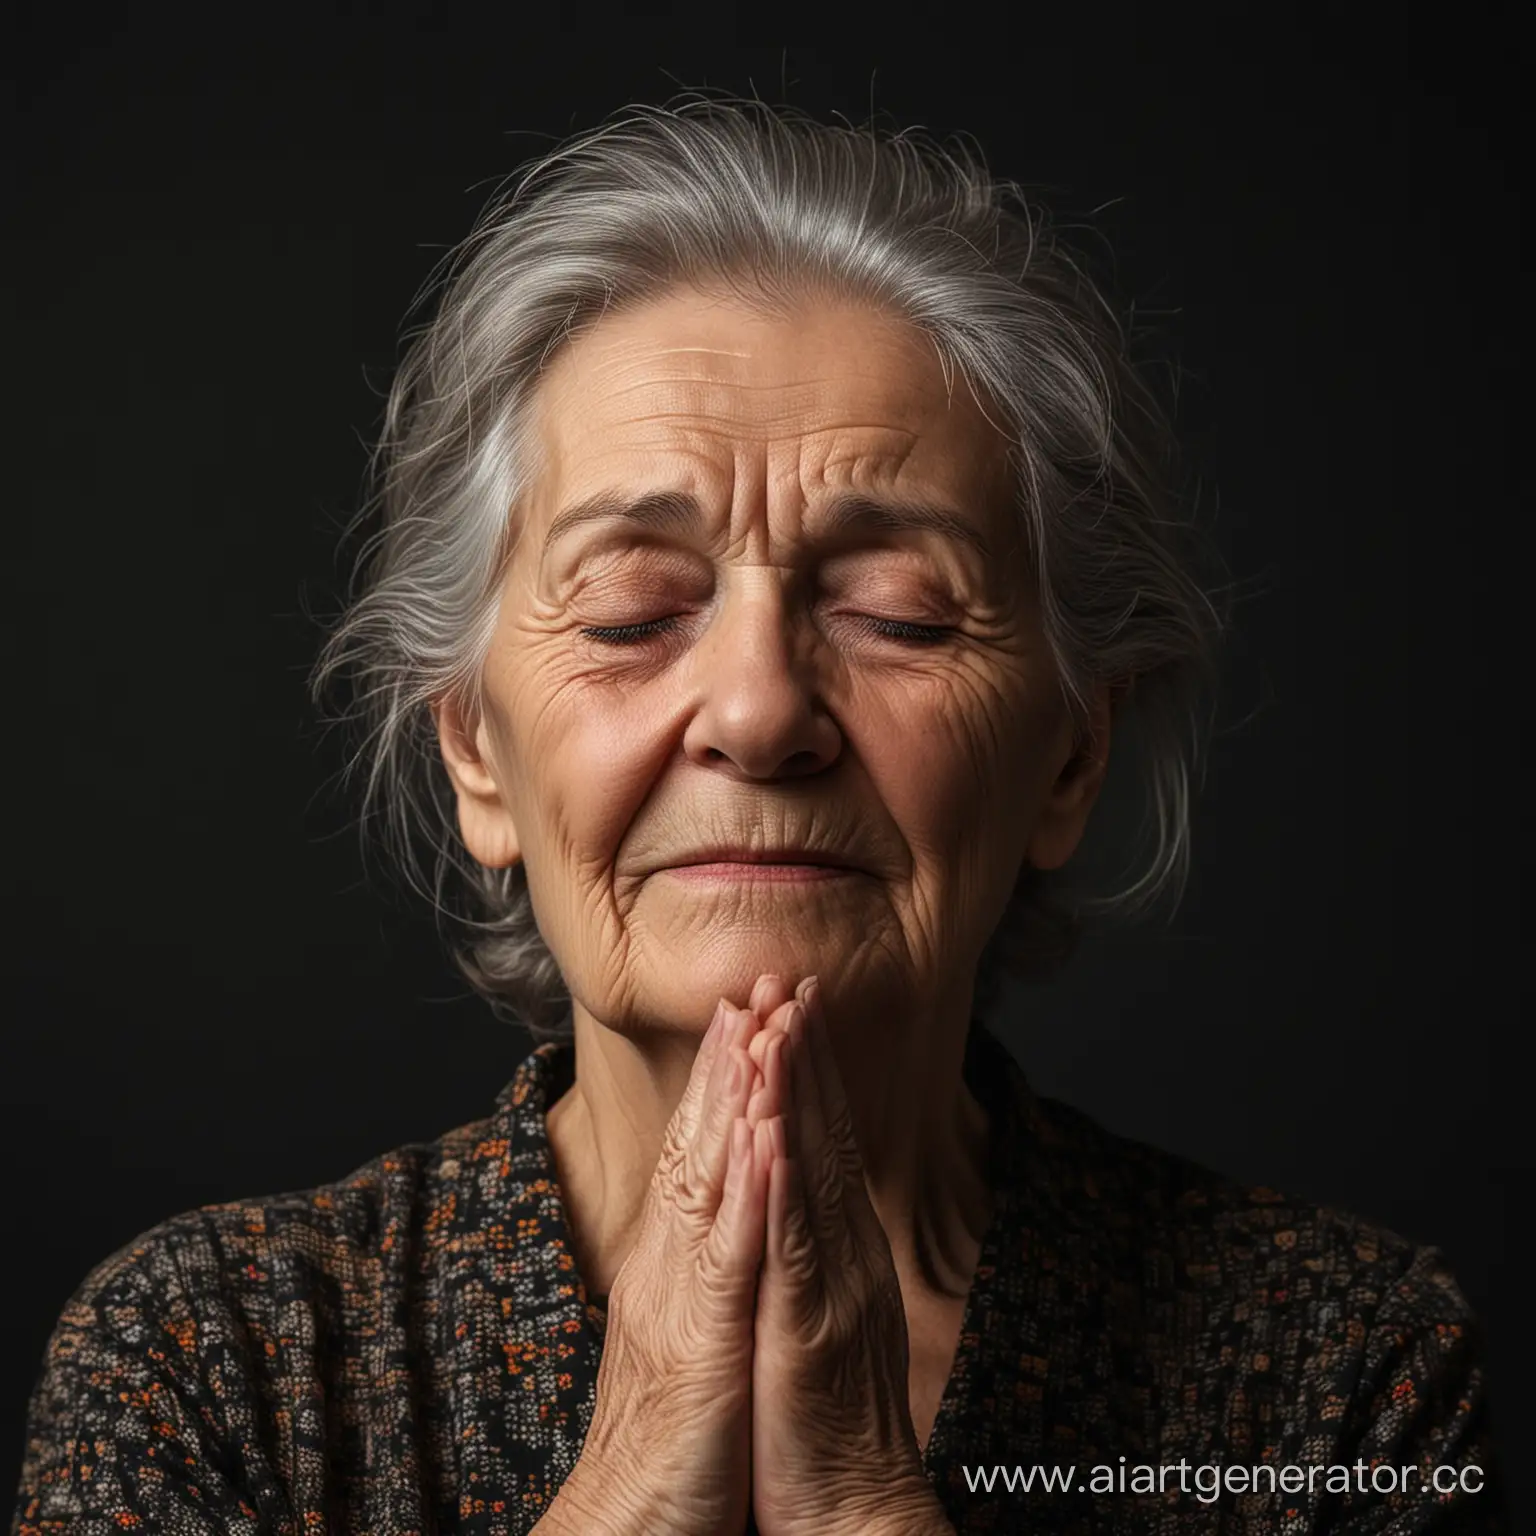 Elderly-Serenity-Woman-Embracing-Tranquility-in-Solitude